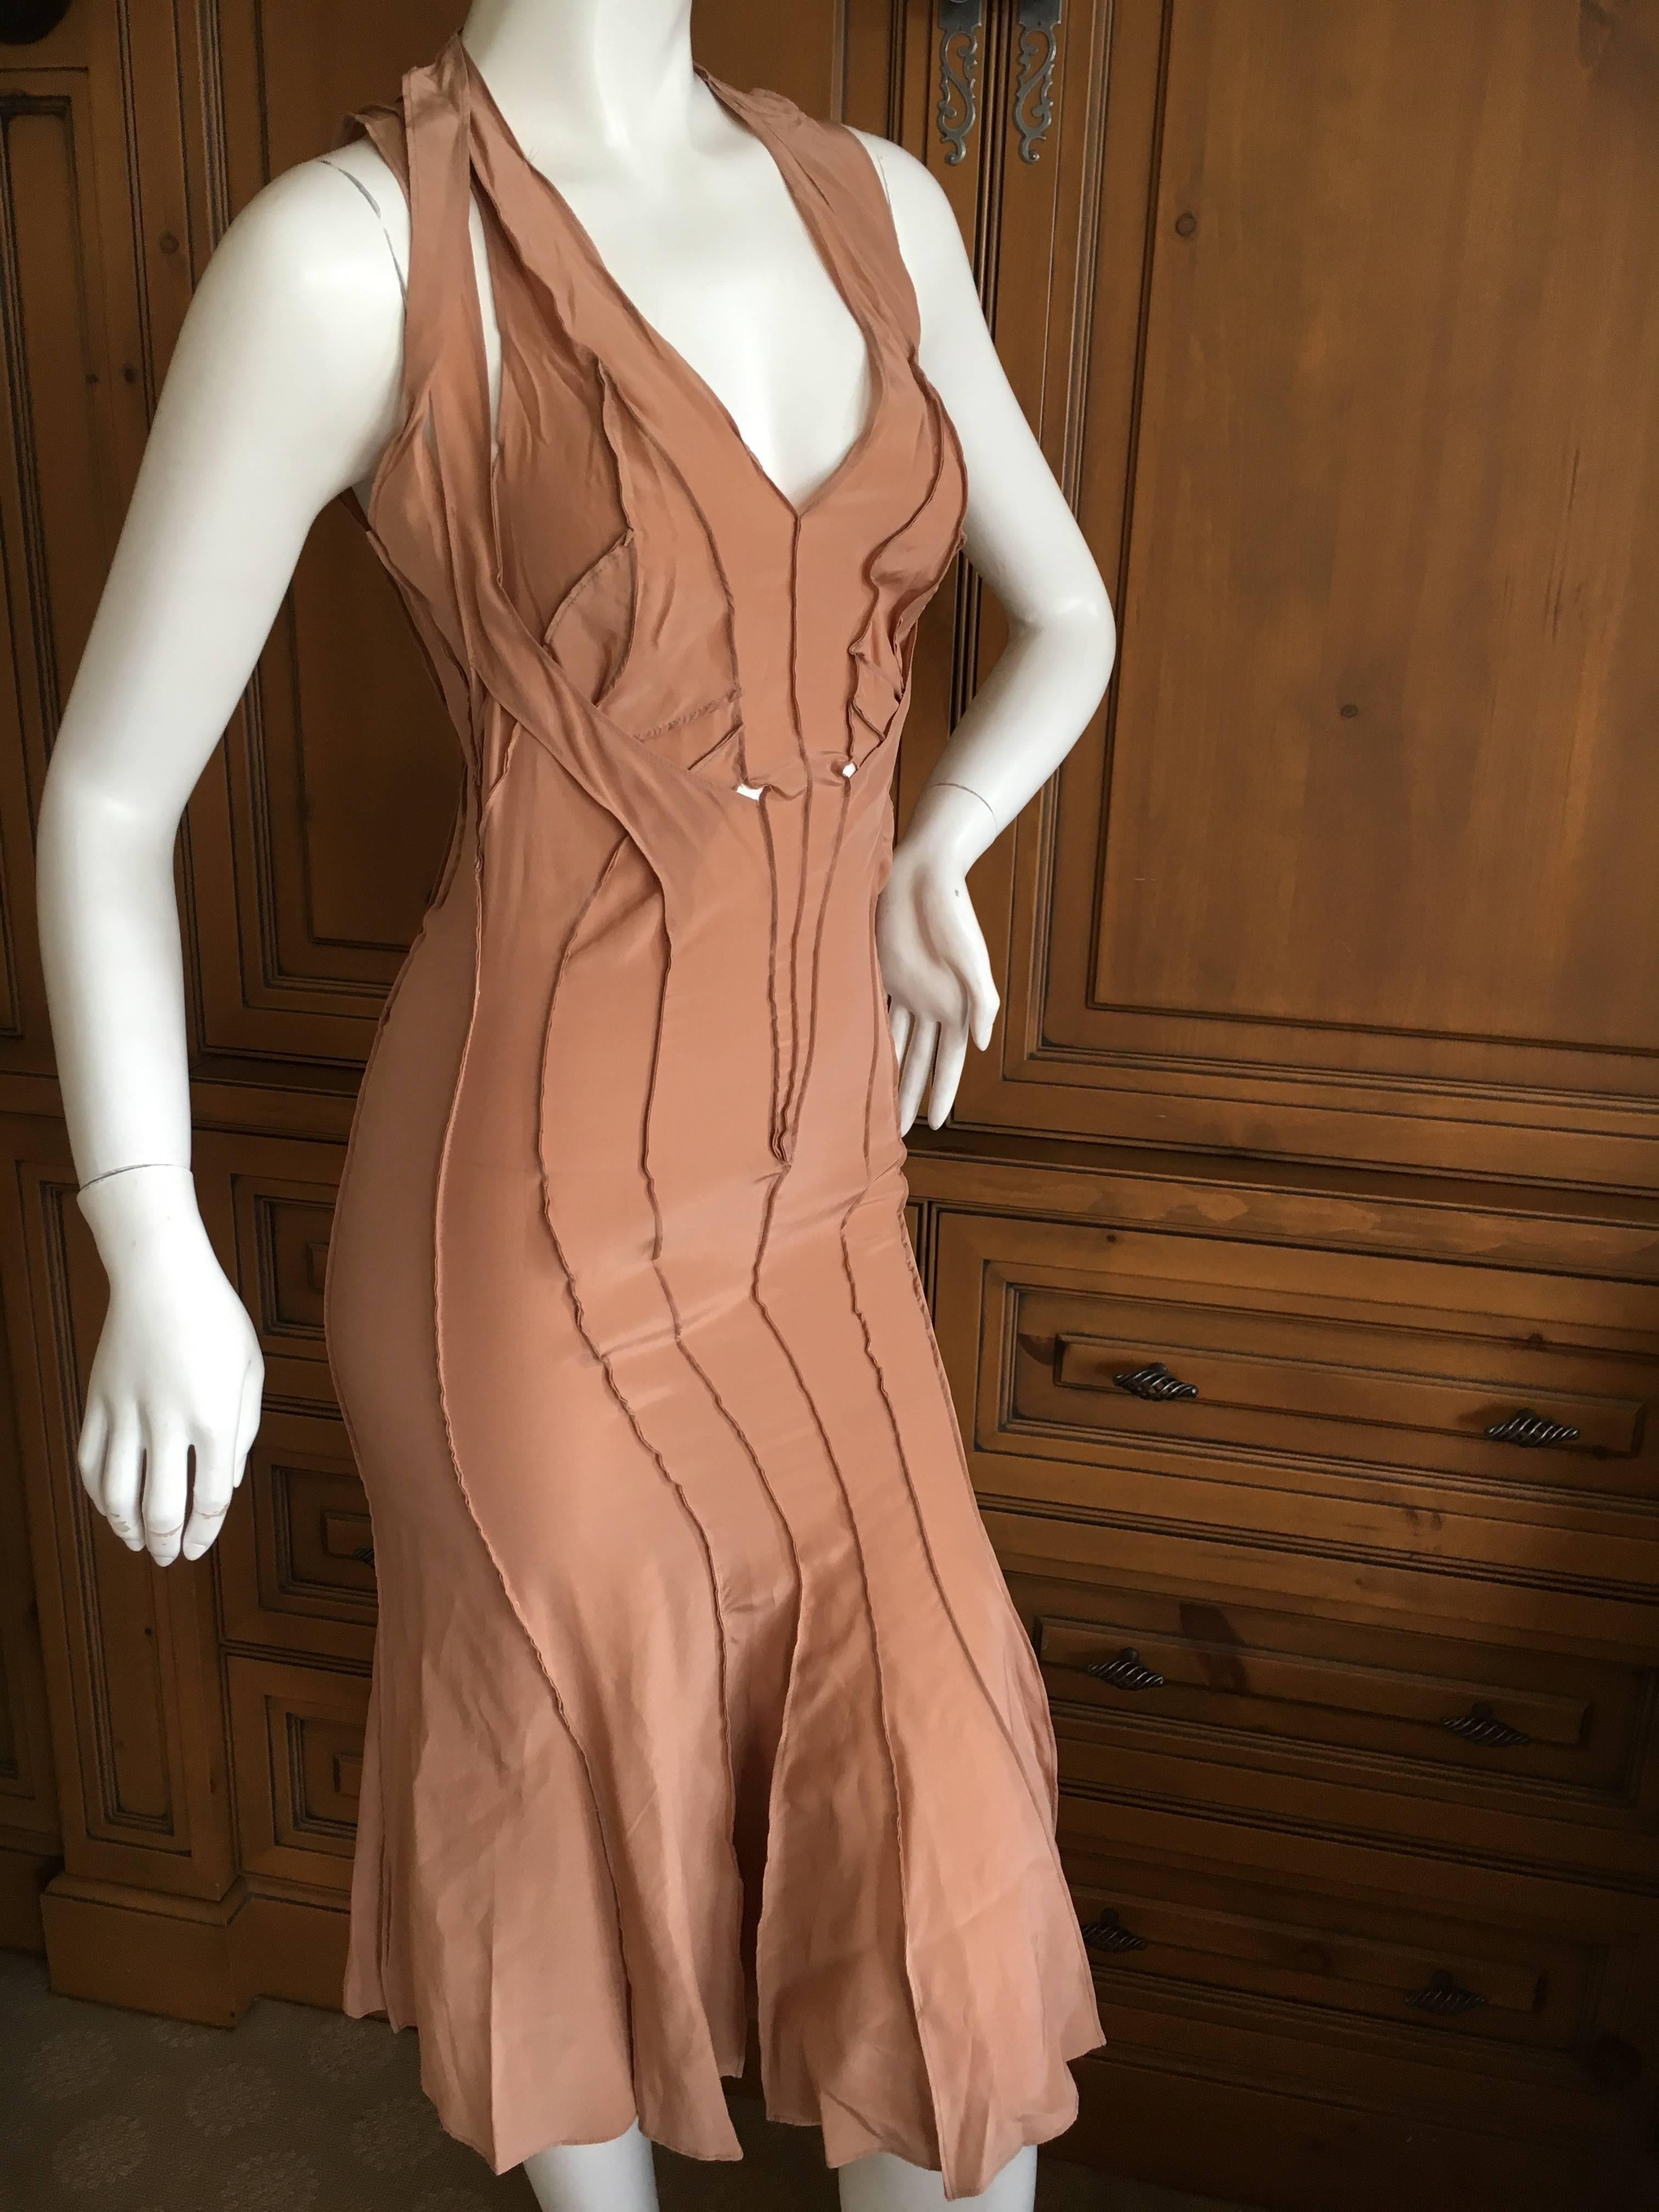 Brown Yves Saint Laurent by Tom Ford 2002 Silk Dress Size 36 For Sale